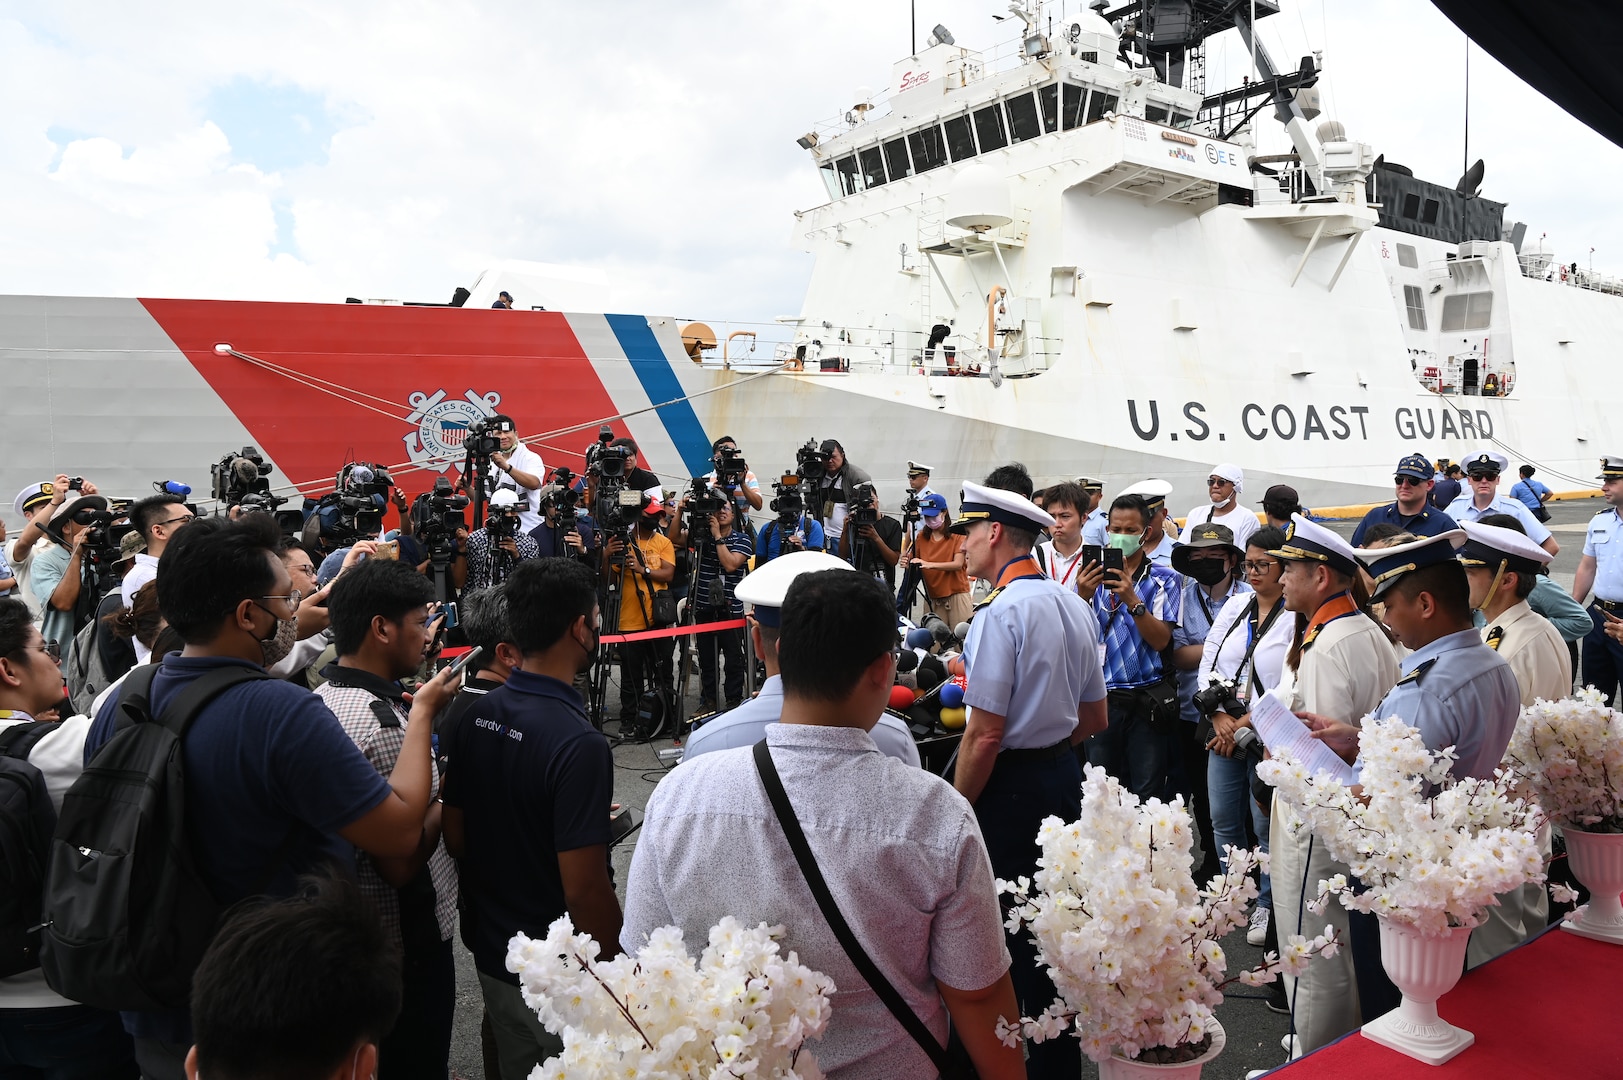 Capt. Brian Krautler, commanding officer of U.S. Coast Guard Cutter Stratton (WMSL 752), addresses the media following Stratton’s arrival to Manila, Philippines, for a tri-lateral engagement with the Philippine and Japan Coast Guards, June 1, 2023. Stratton deployed to the Western Pacific under U.S. Navy 7th Fleet command to serve as a non-escalatory asset for the promotion of a rules-based order in the maritime domain by engaging with partner nations and allies in the region. (U.S. Coast Guard photo by Chief Petty Officer Matt Masaschi)